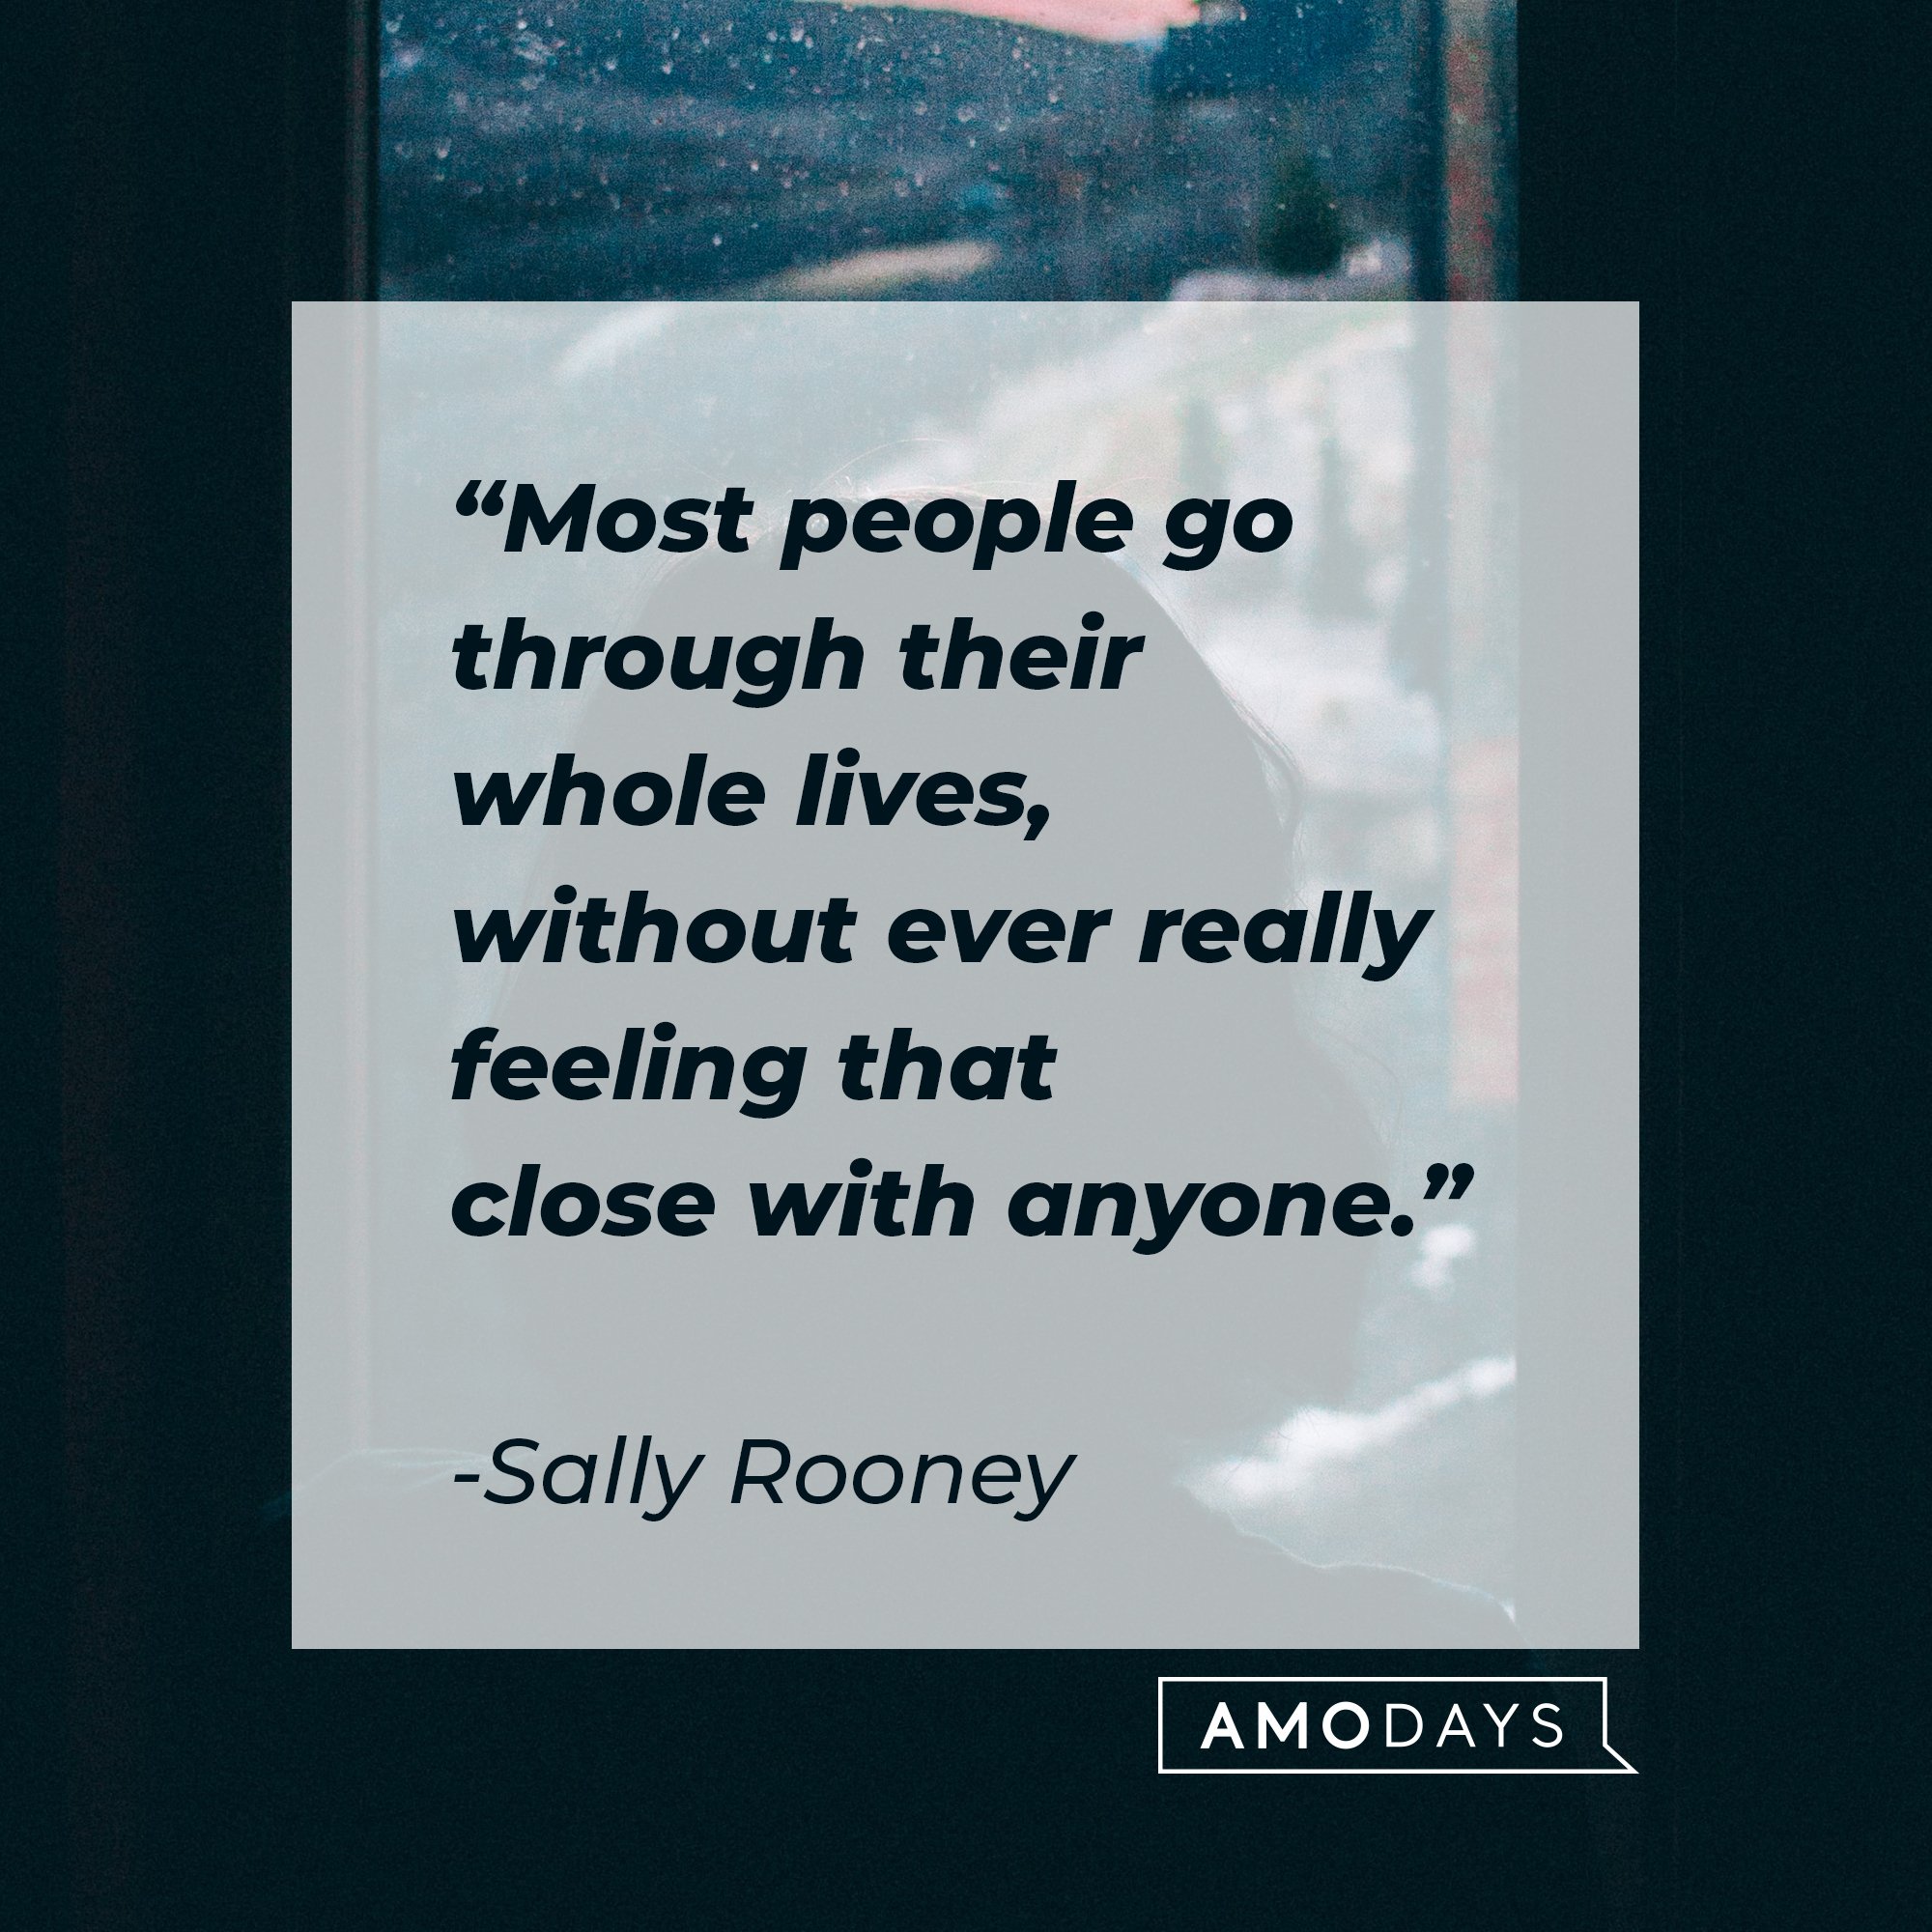 Sally Rooney's quote: "Most people go through their whole lives, without ever really feeling that close with anyone." | Image: AmoDays